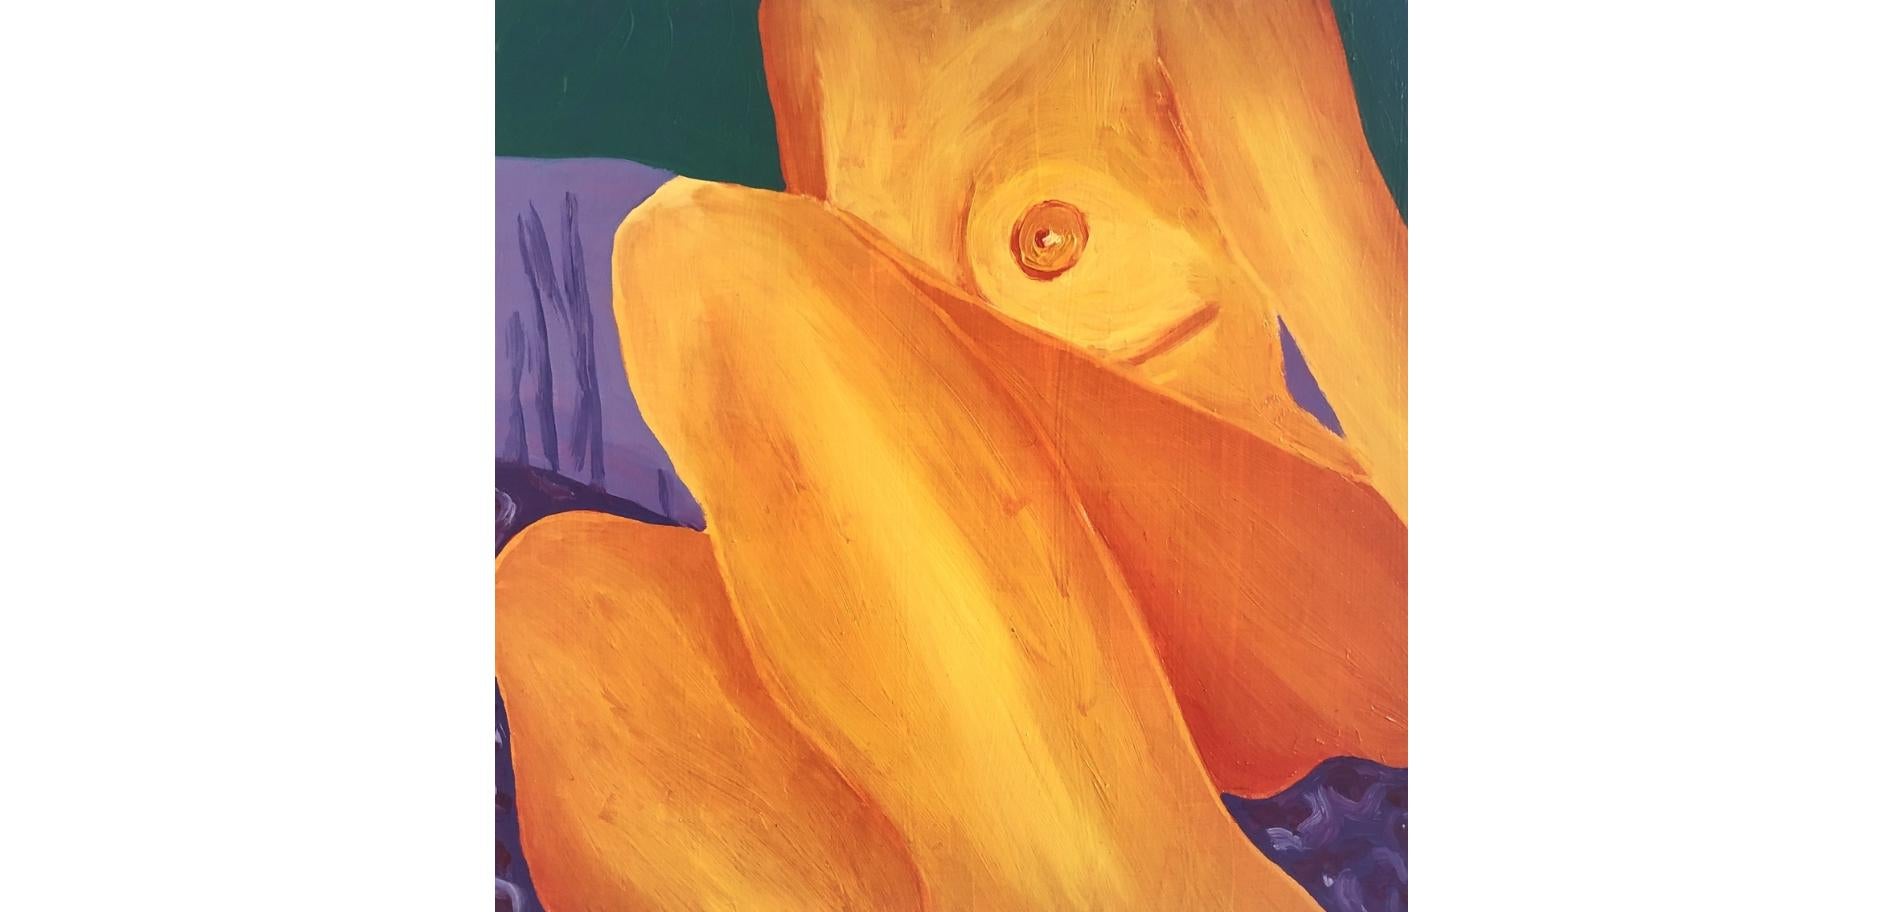 Tender (2020), golden yellow & orange nude oil on wood panel figurative painting - Painting by Jessica Rubin